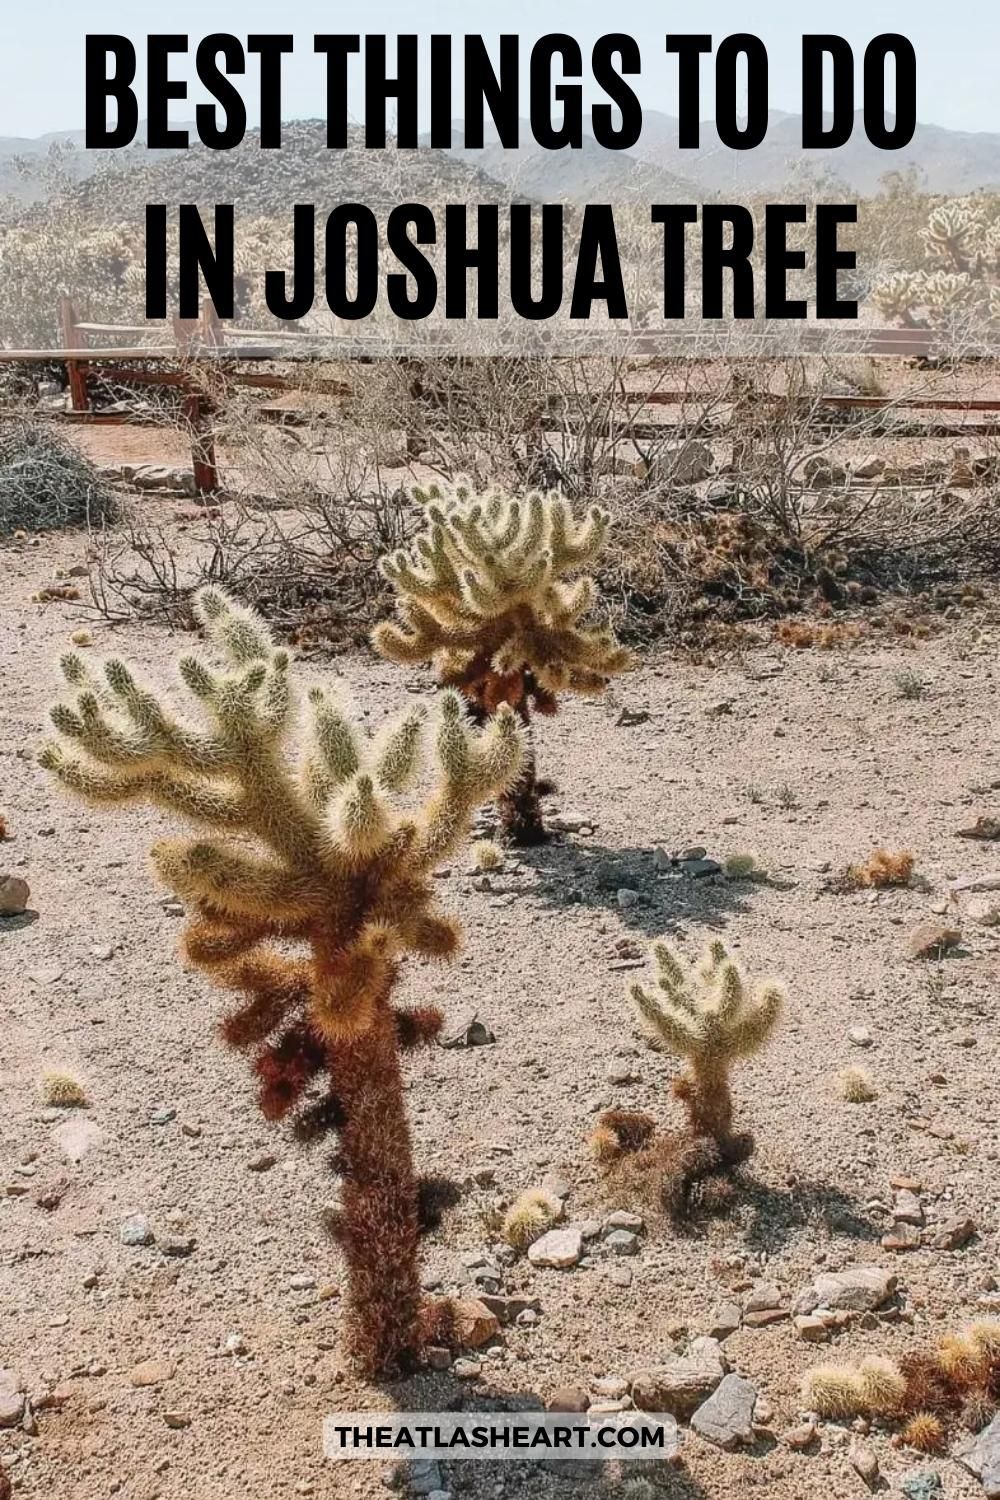 45 Fun & Best Things to do in Joshua Tree to Get the Most Out of Your Desert Escape